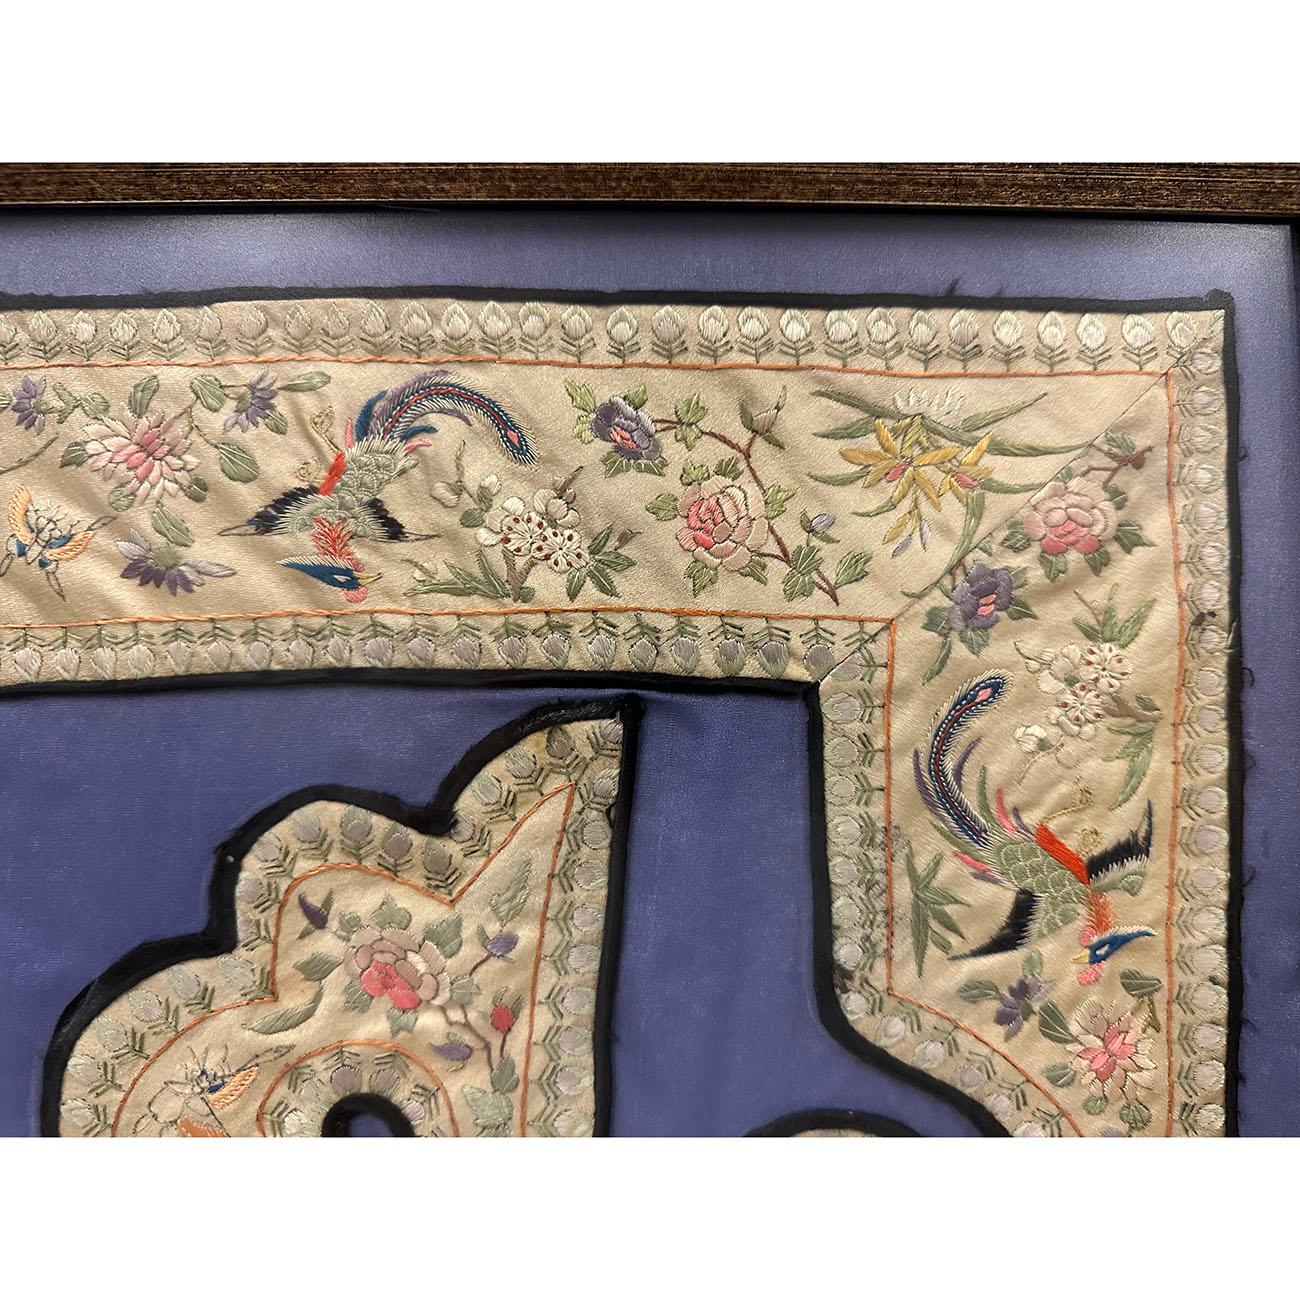 19th Century Antique Chinese Framed Groups of Textile Embroidery Pieces In Good Condition For Sale In Pomona, CA